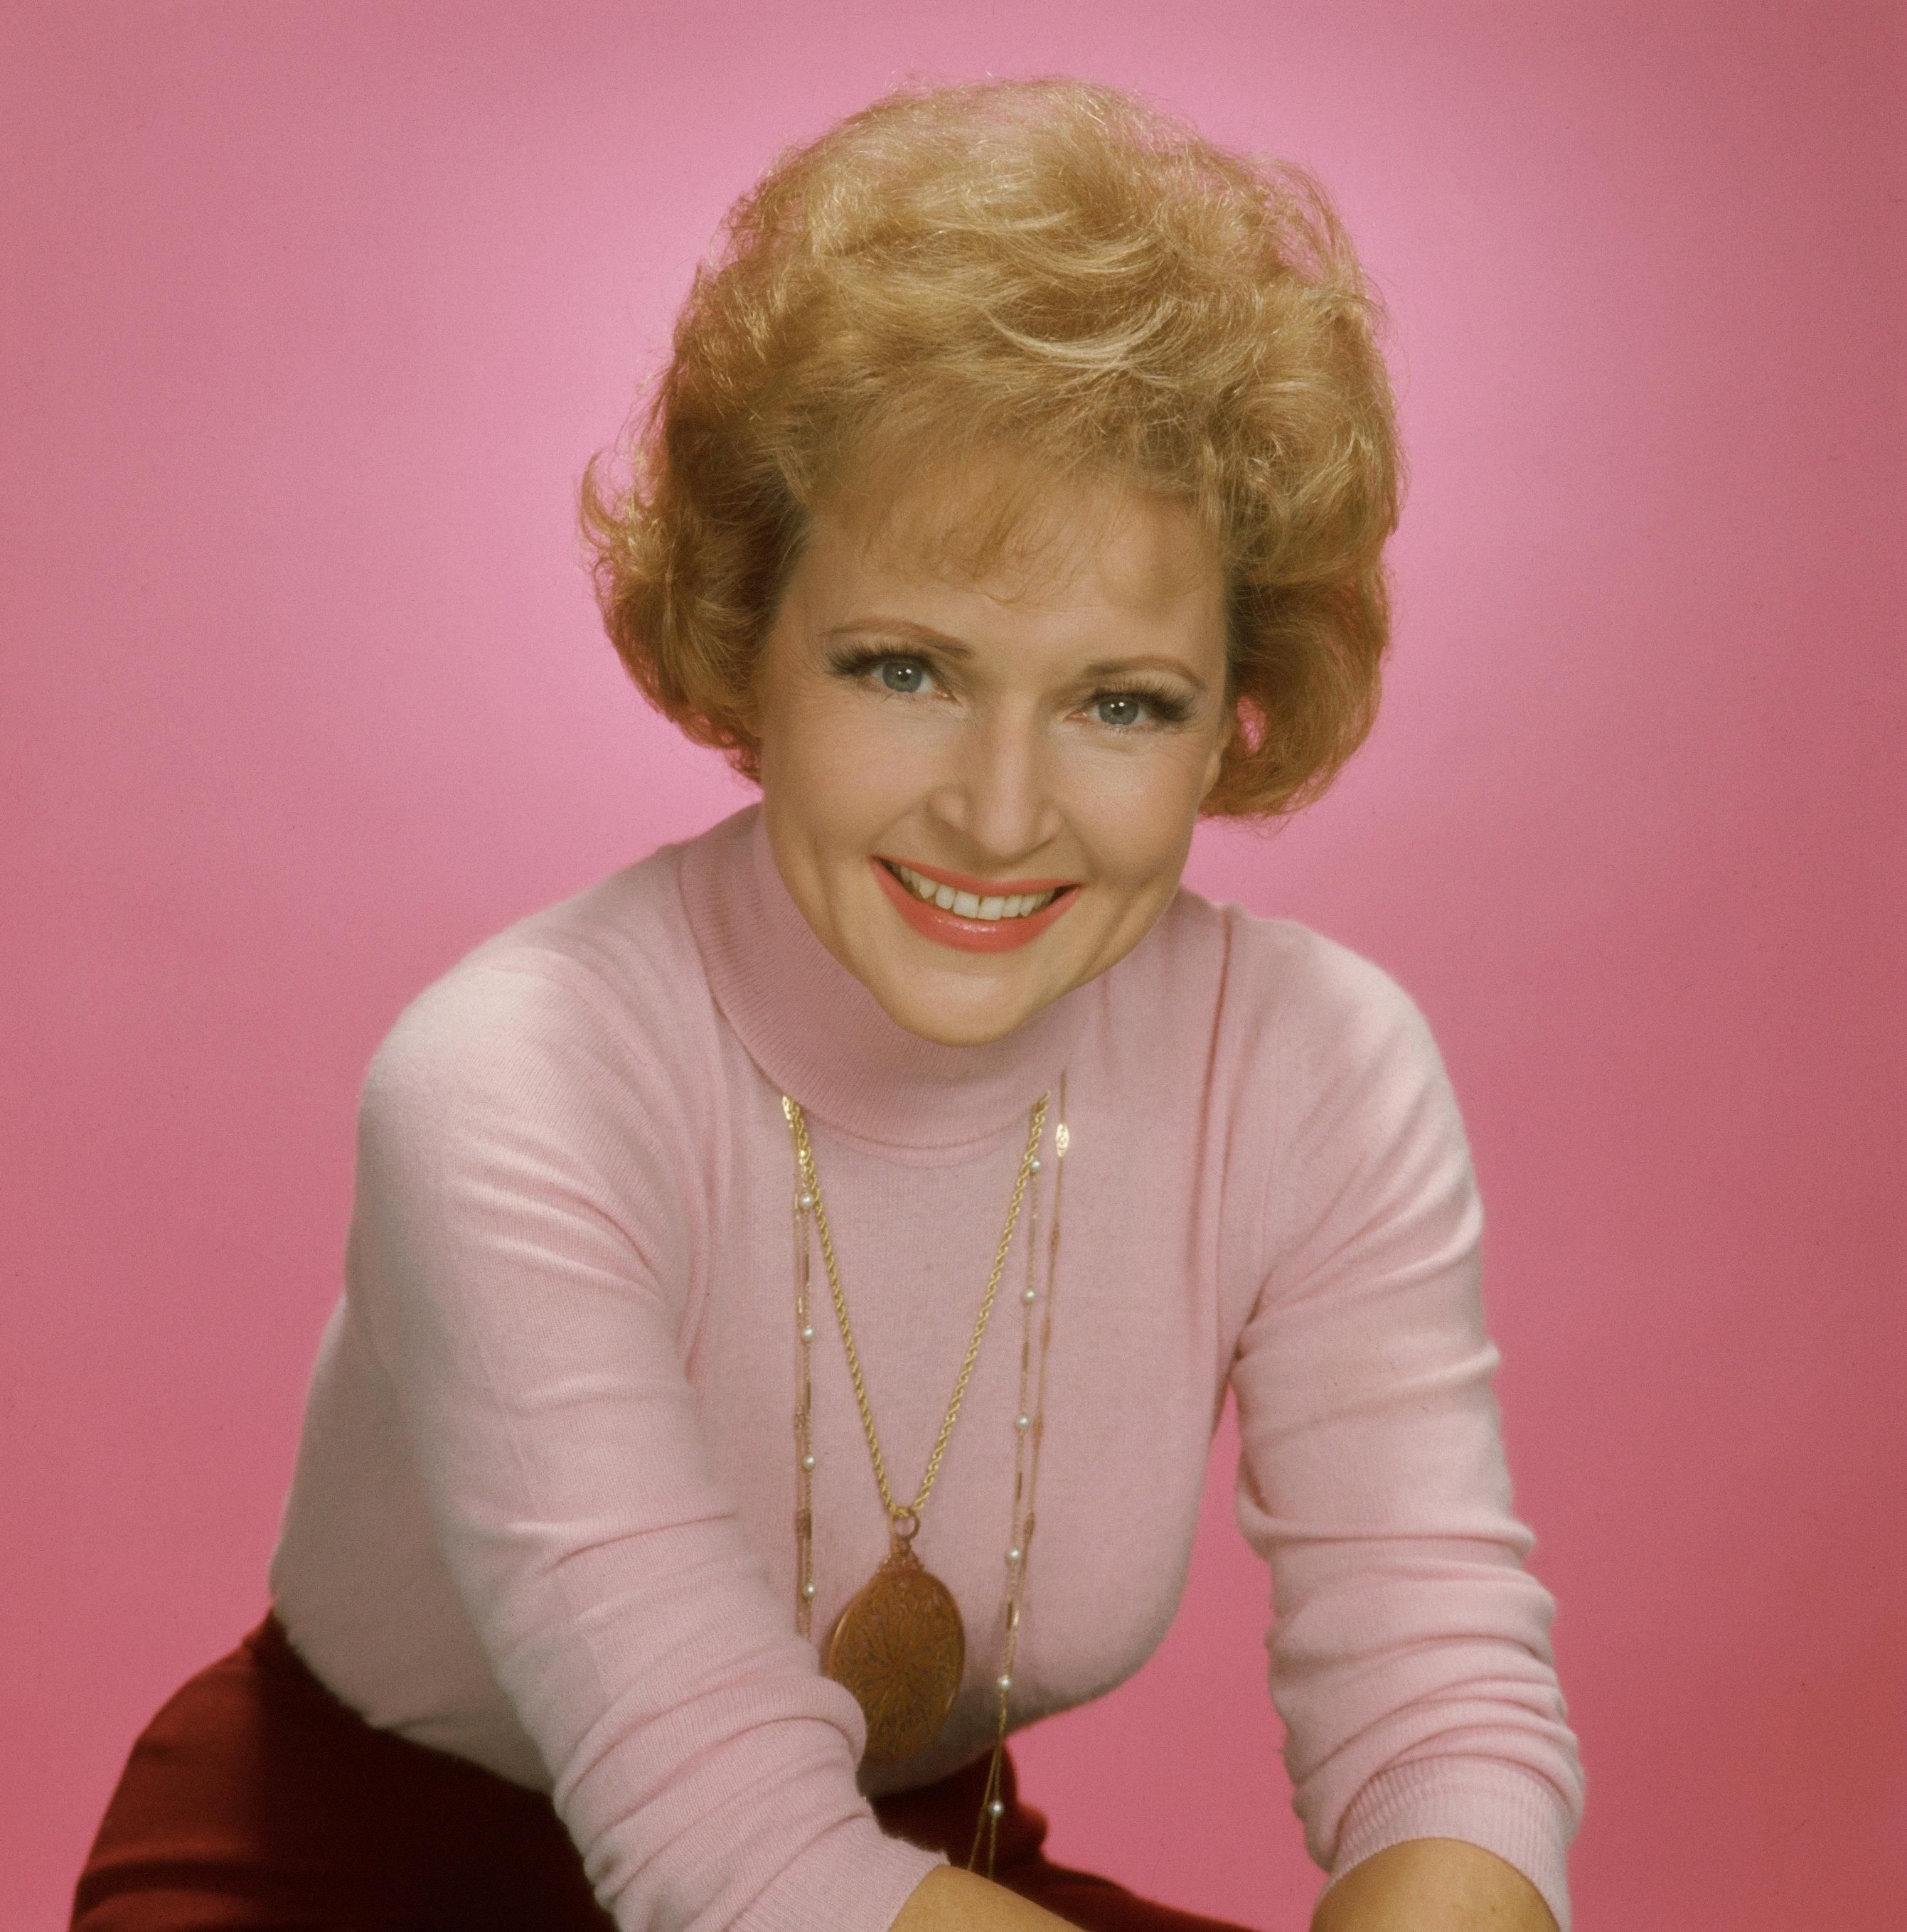 Actress Betty White in a pink and rose colored outfit against a pink backdrop in the 1970s